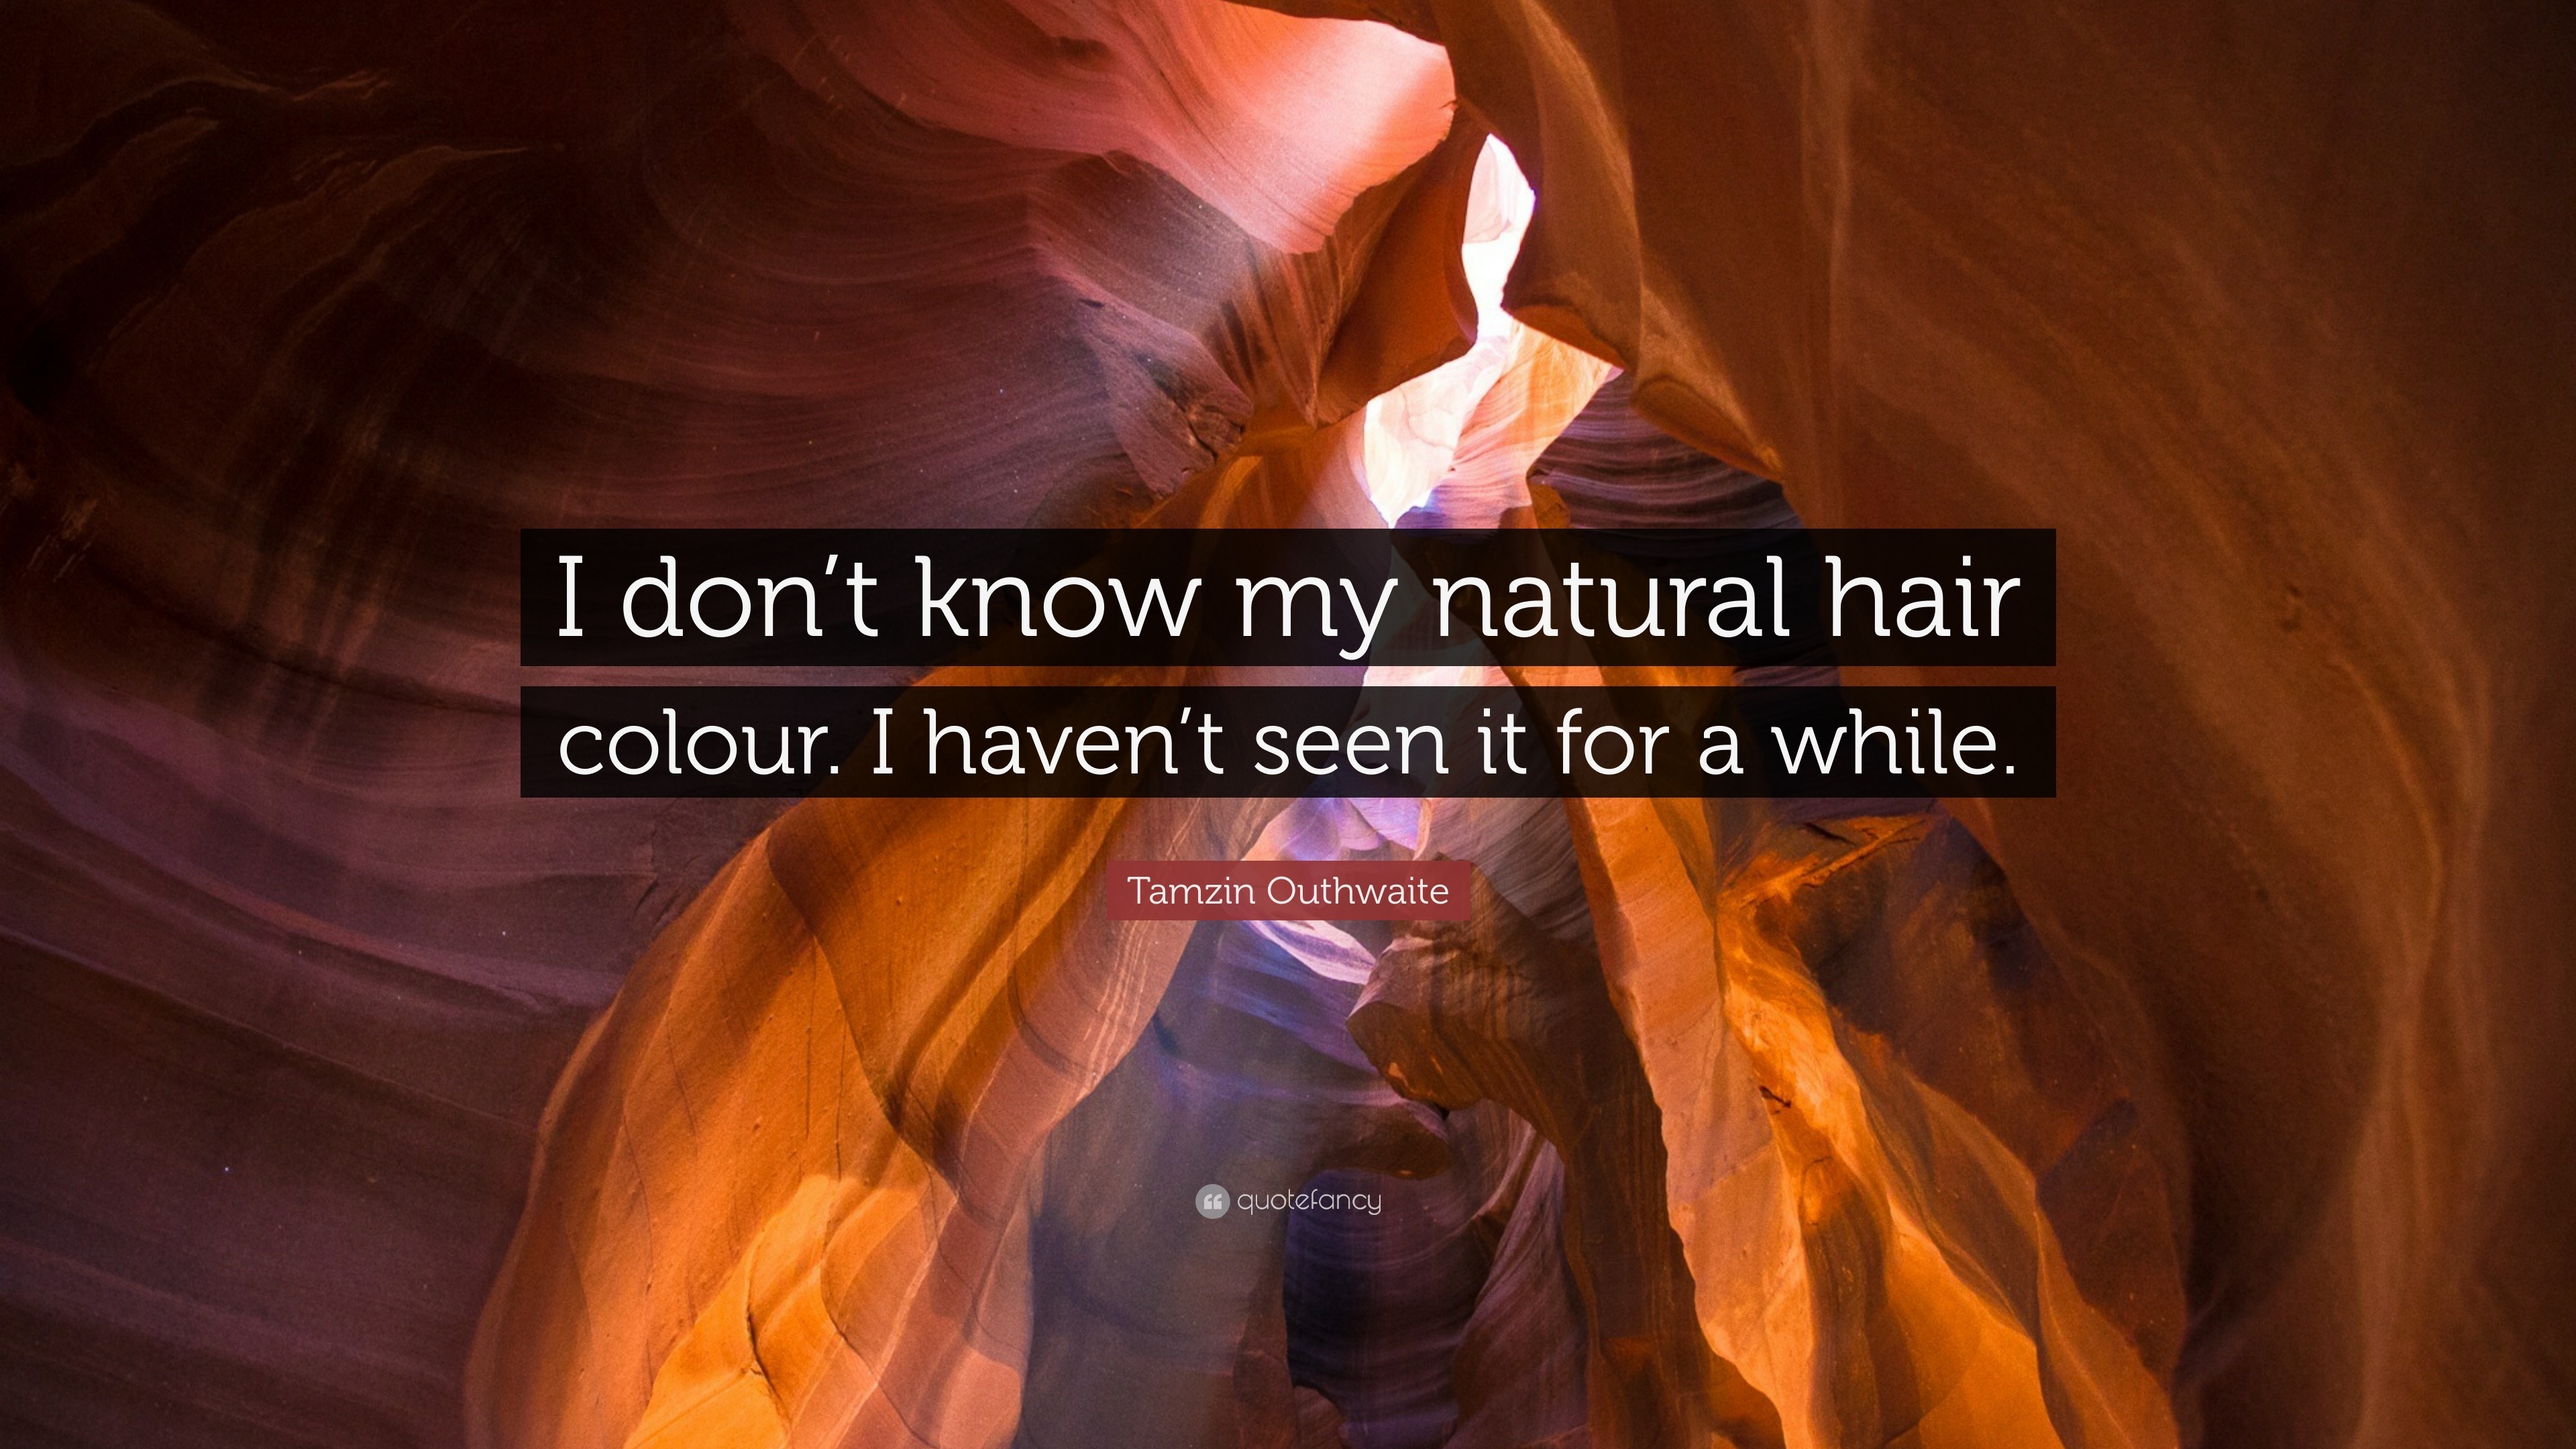 Tamzin Outhwaite Quote: “I don't know my natural hair colour. I haven't  seen it